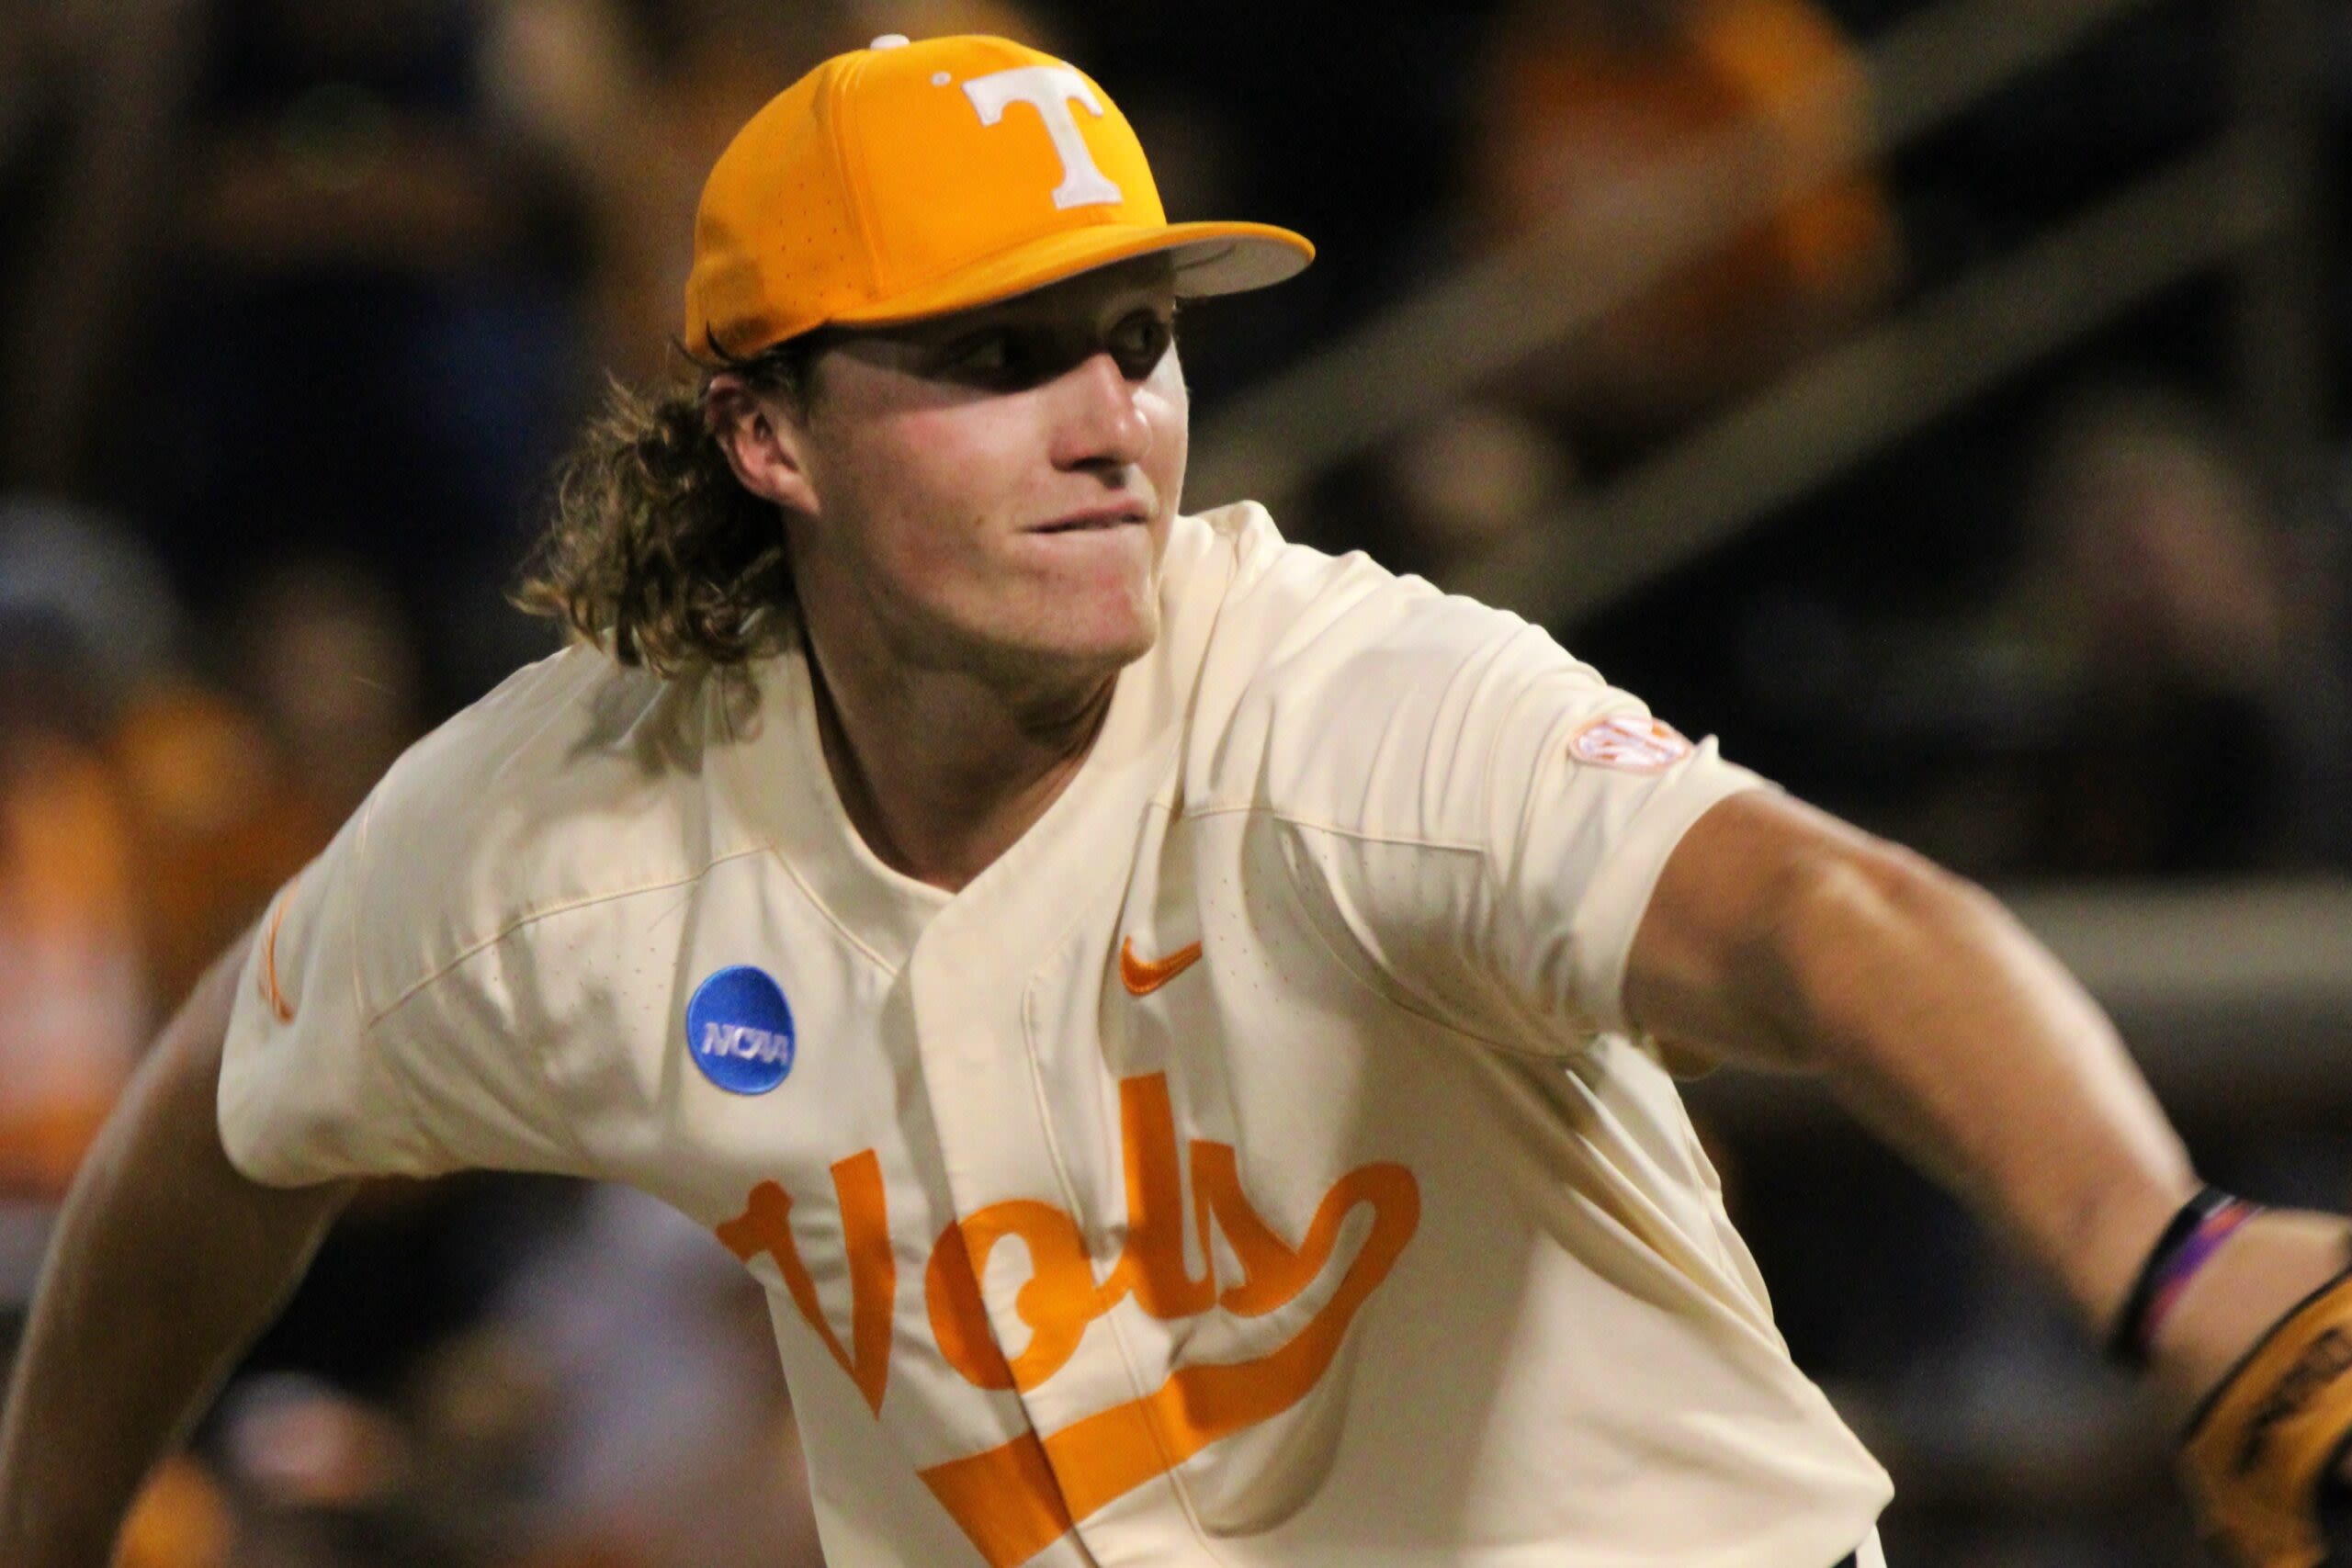 Tennessee baseball wins sixth consecutive NCAA Tournament regional in Knoxville